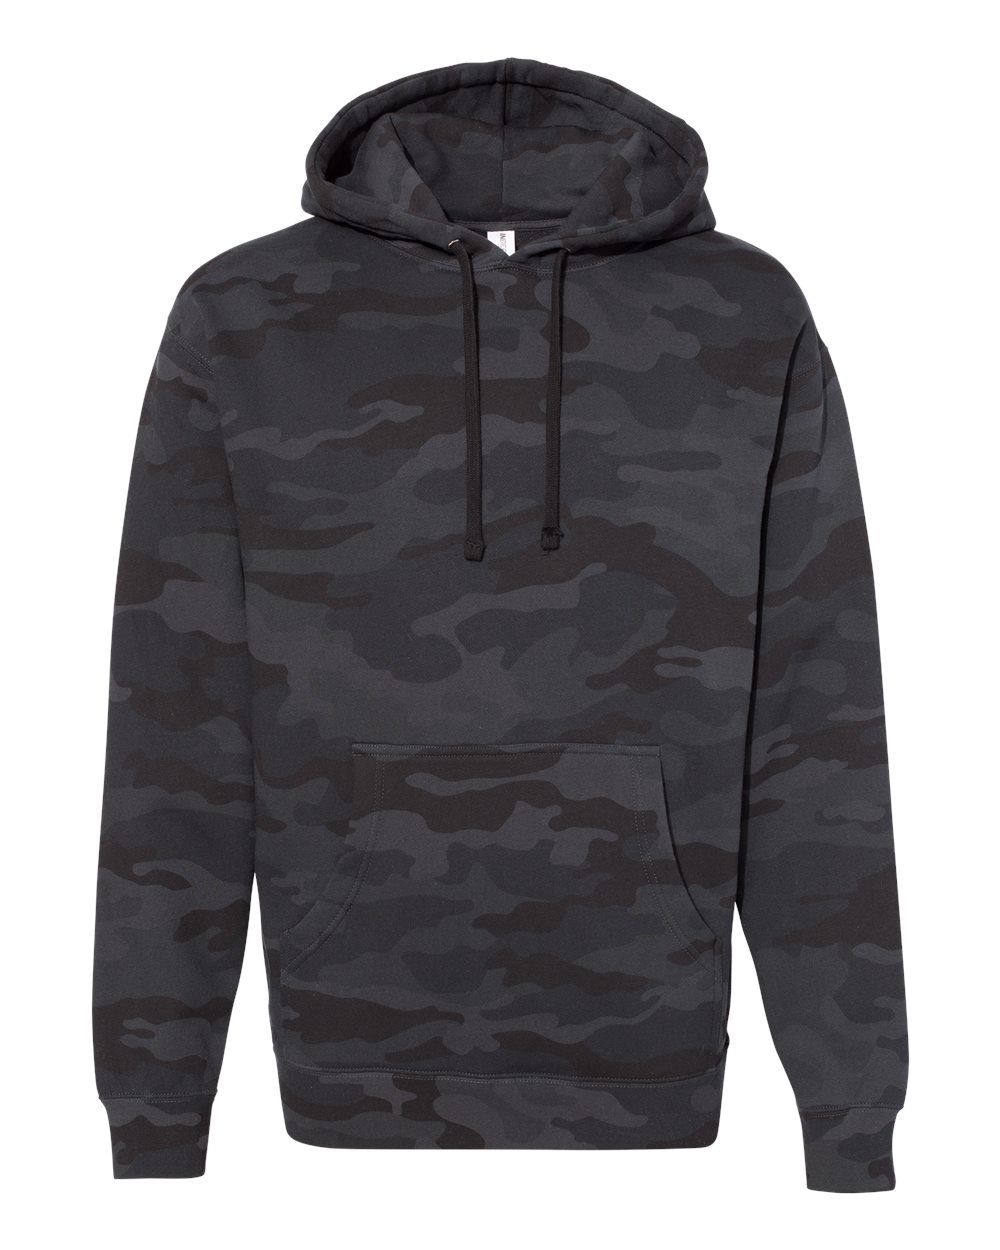 https://images.shirtspace.com/fullsize/oJwi9w%2FAN%2BSOUyyYzfoC7w%3D%3D/302309/16116-independent-trading-co-ind4000-heavyweight-hooded-sweatshirt-front-black-camouflage.jpg